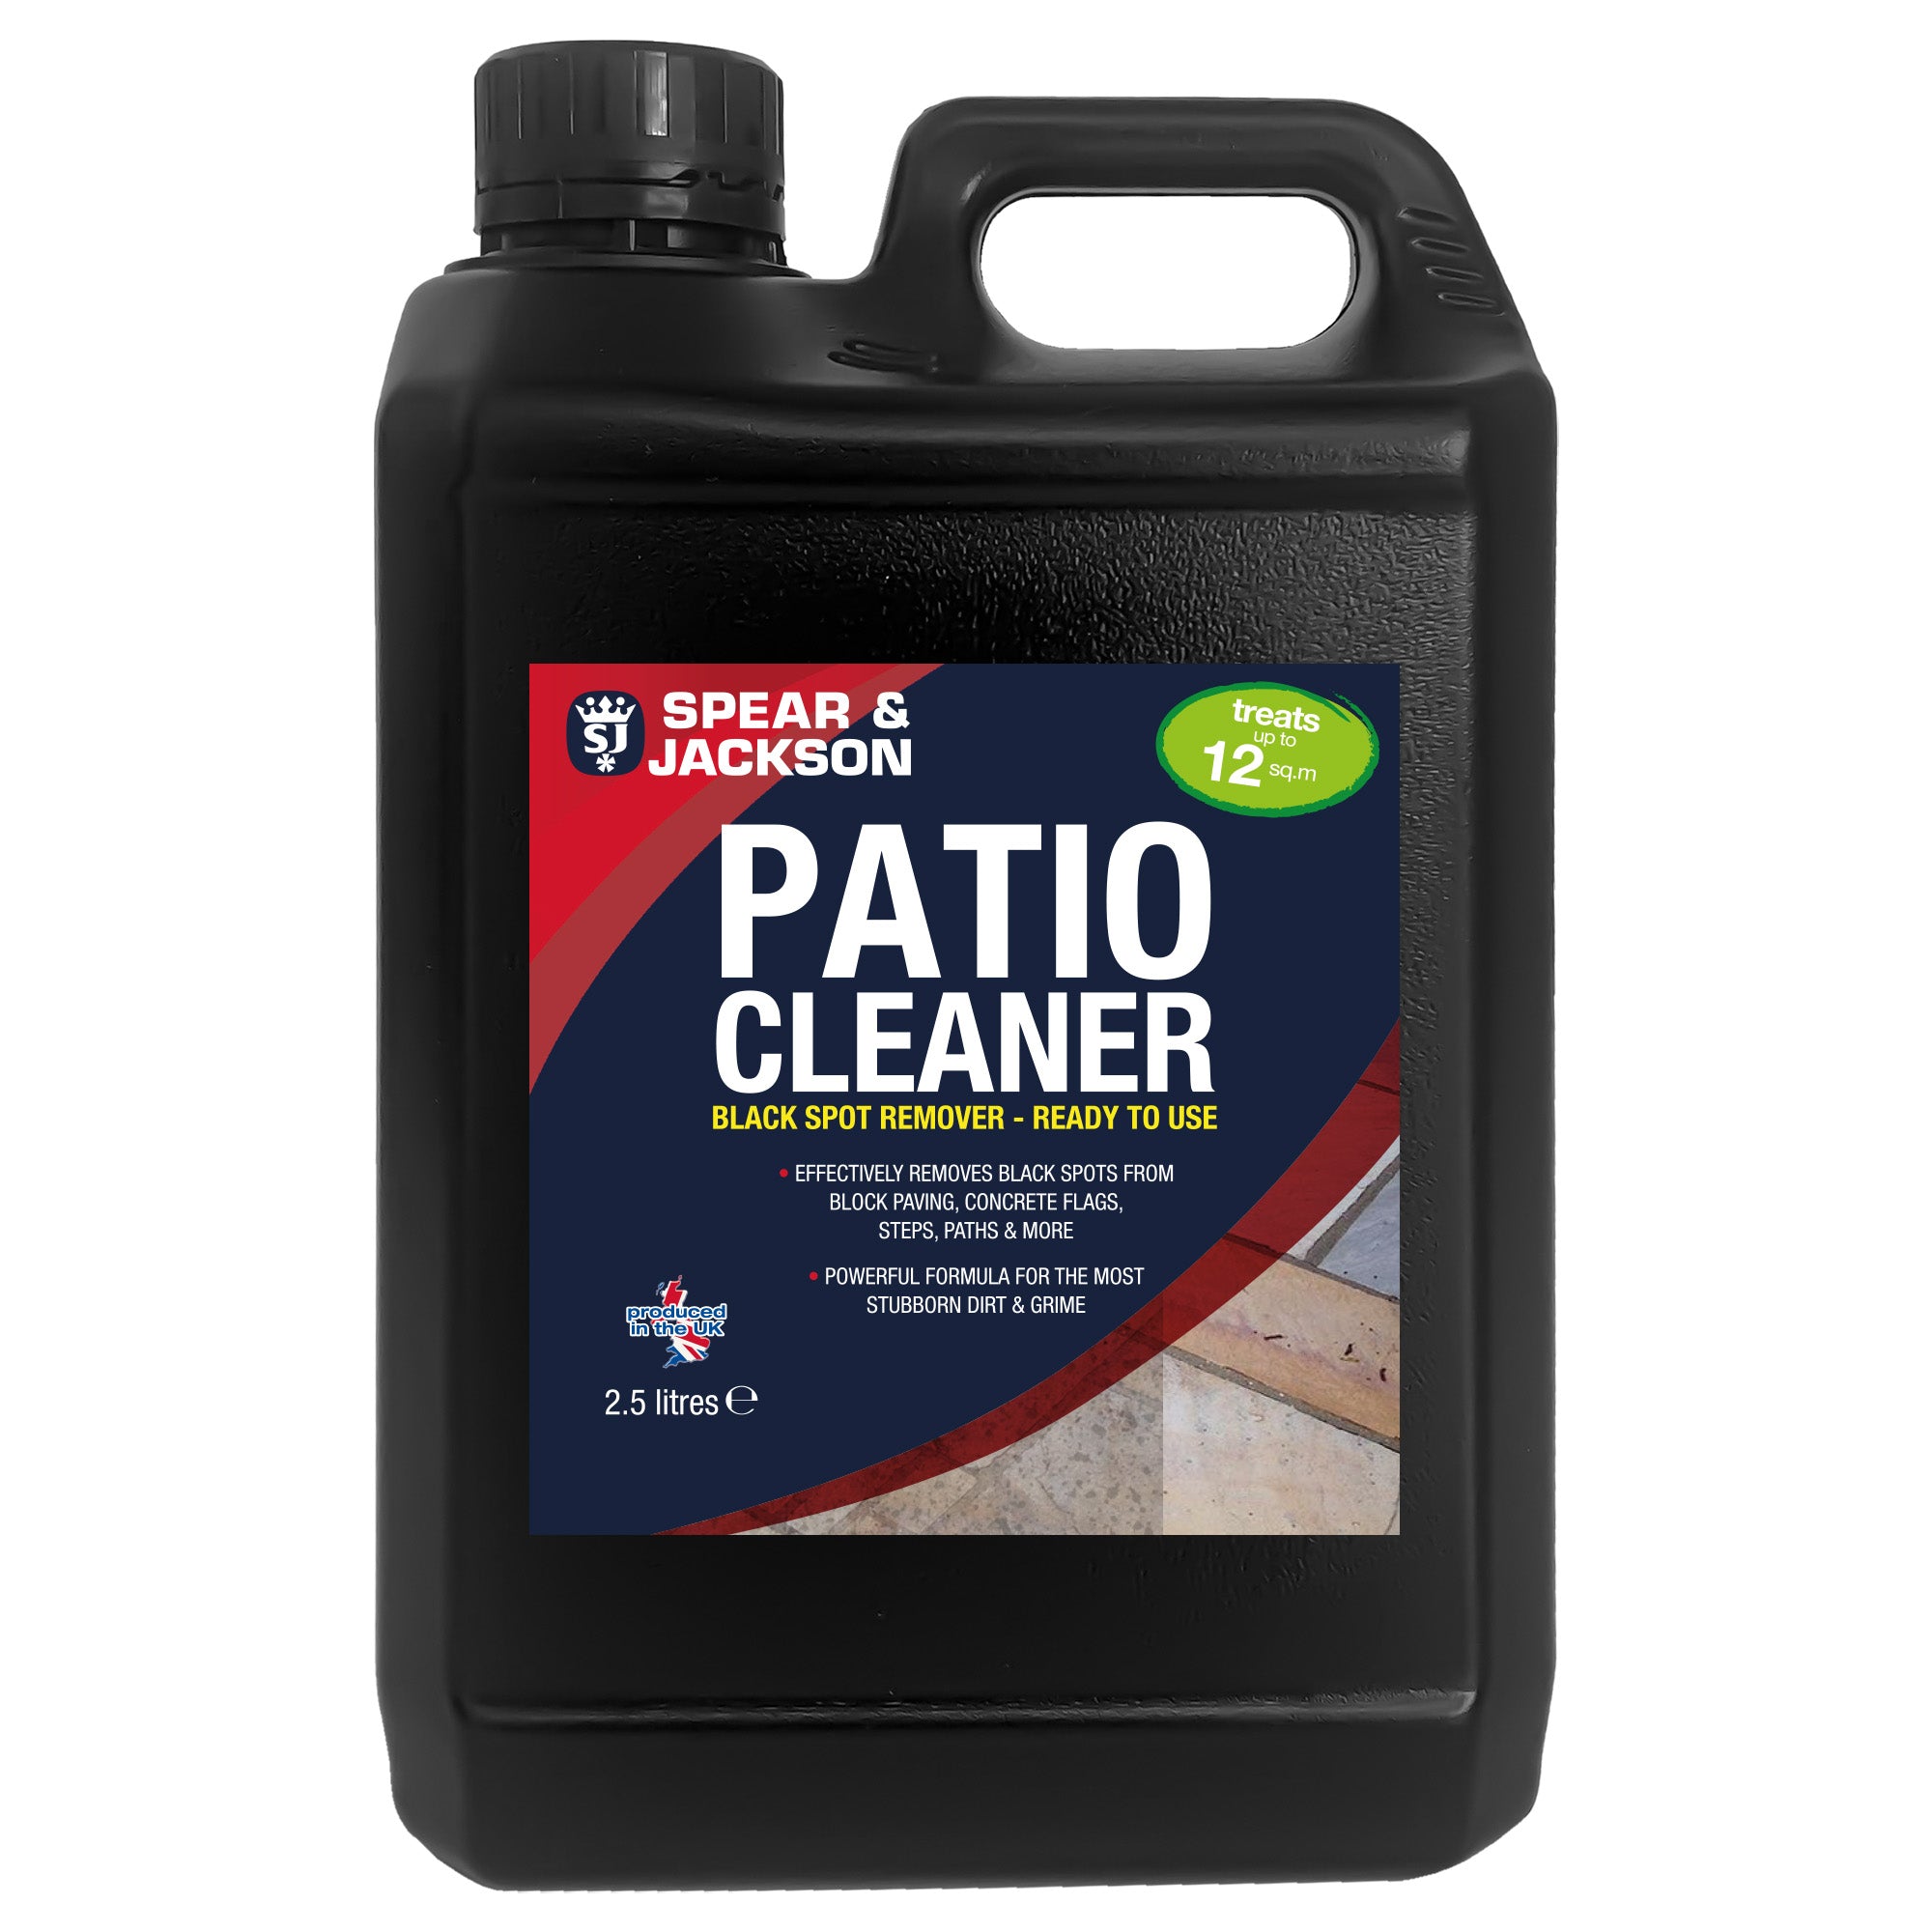 Black Spot Remover - Spear & Jackson - 2.5L - Ready to Use Patio Cleaner